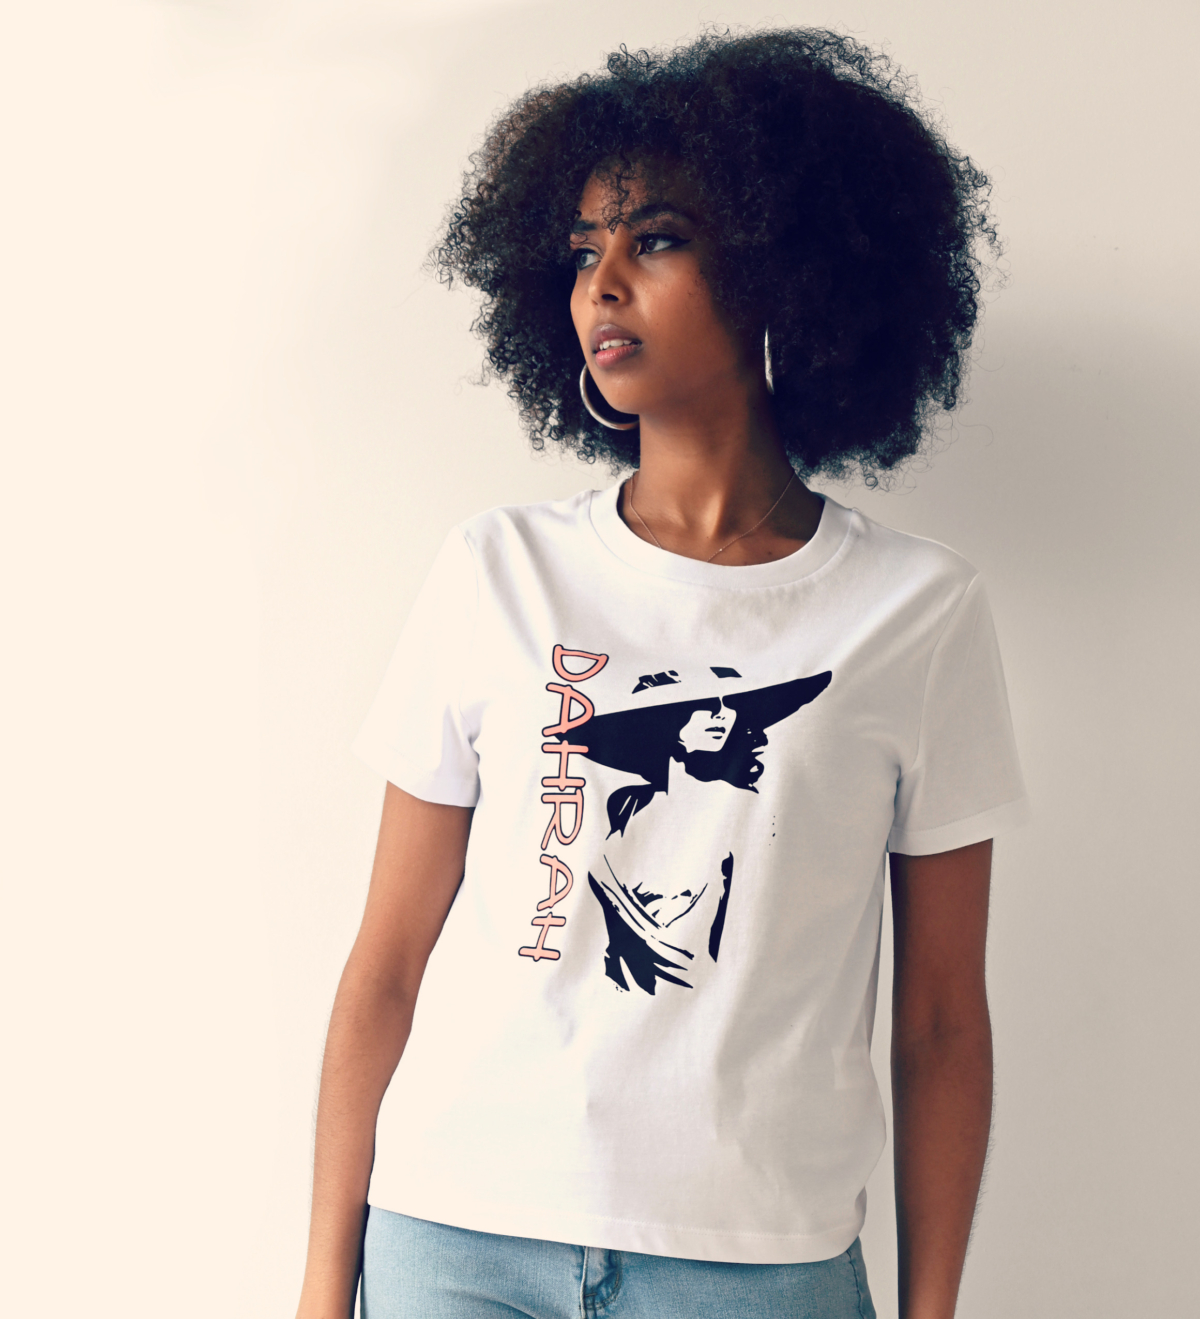 Organic t-SHIRT with print of an elegant lady with hat by Dahrah Darah Fashion.